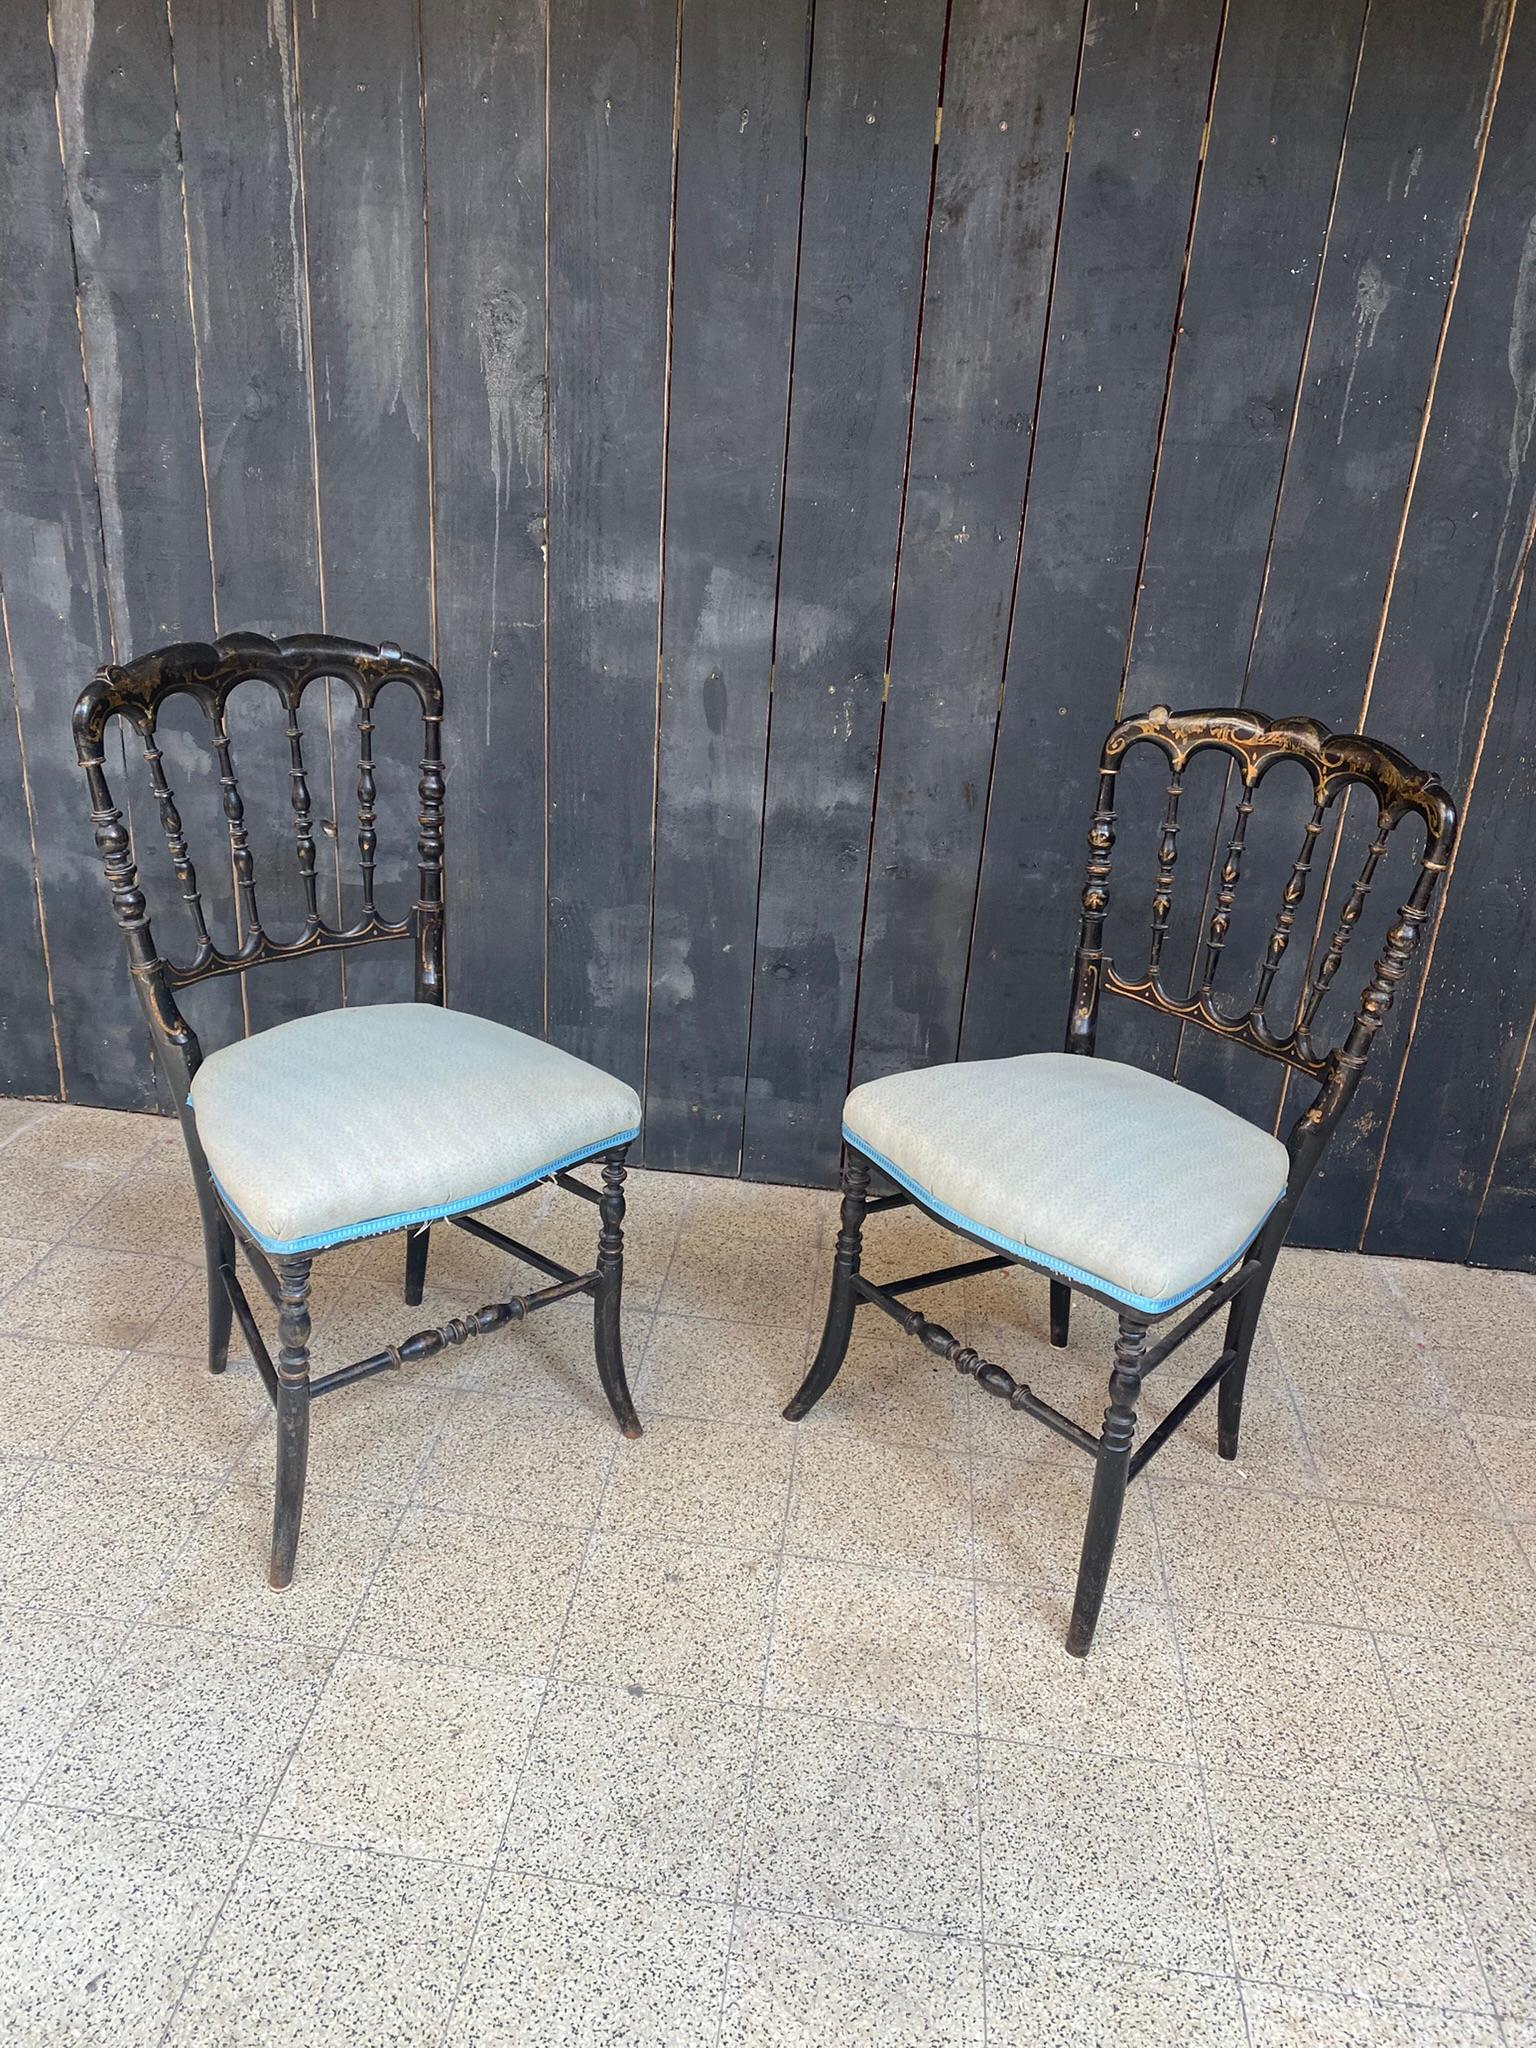 2 Original Napoleon III ebonized chairs, France, 1850s.
Wear and lack of gilding.